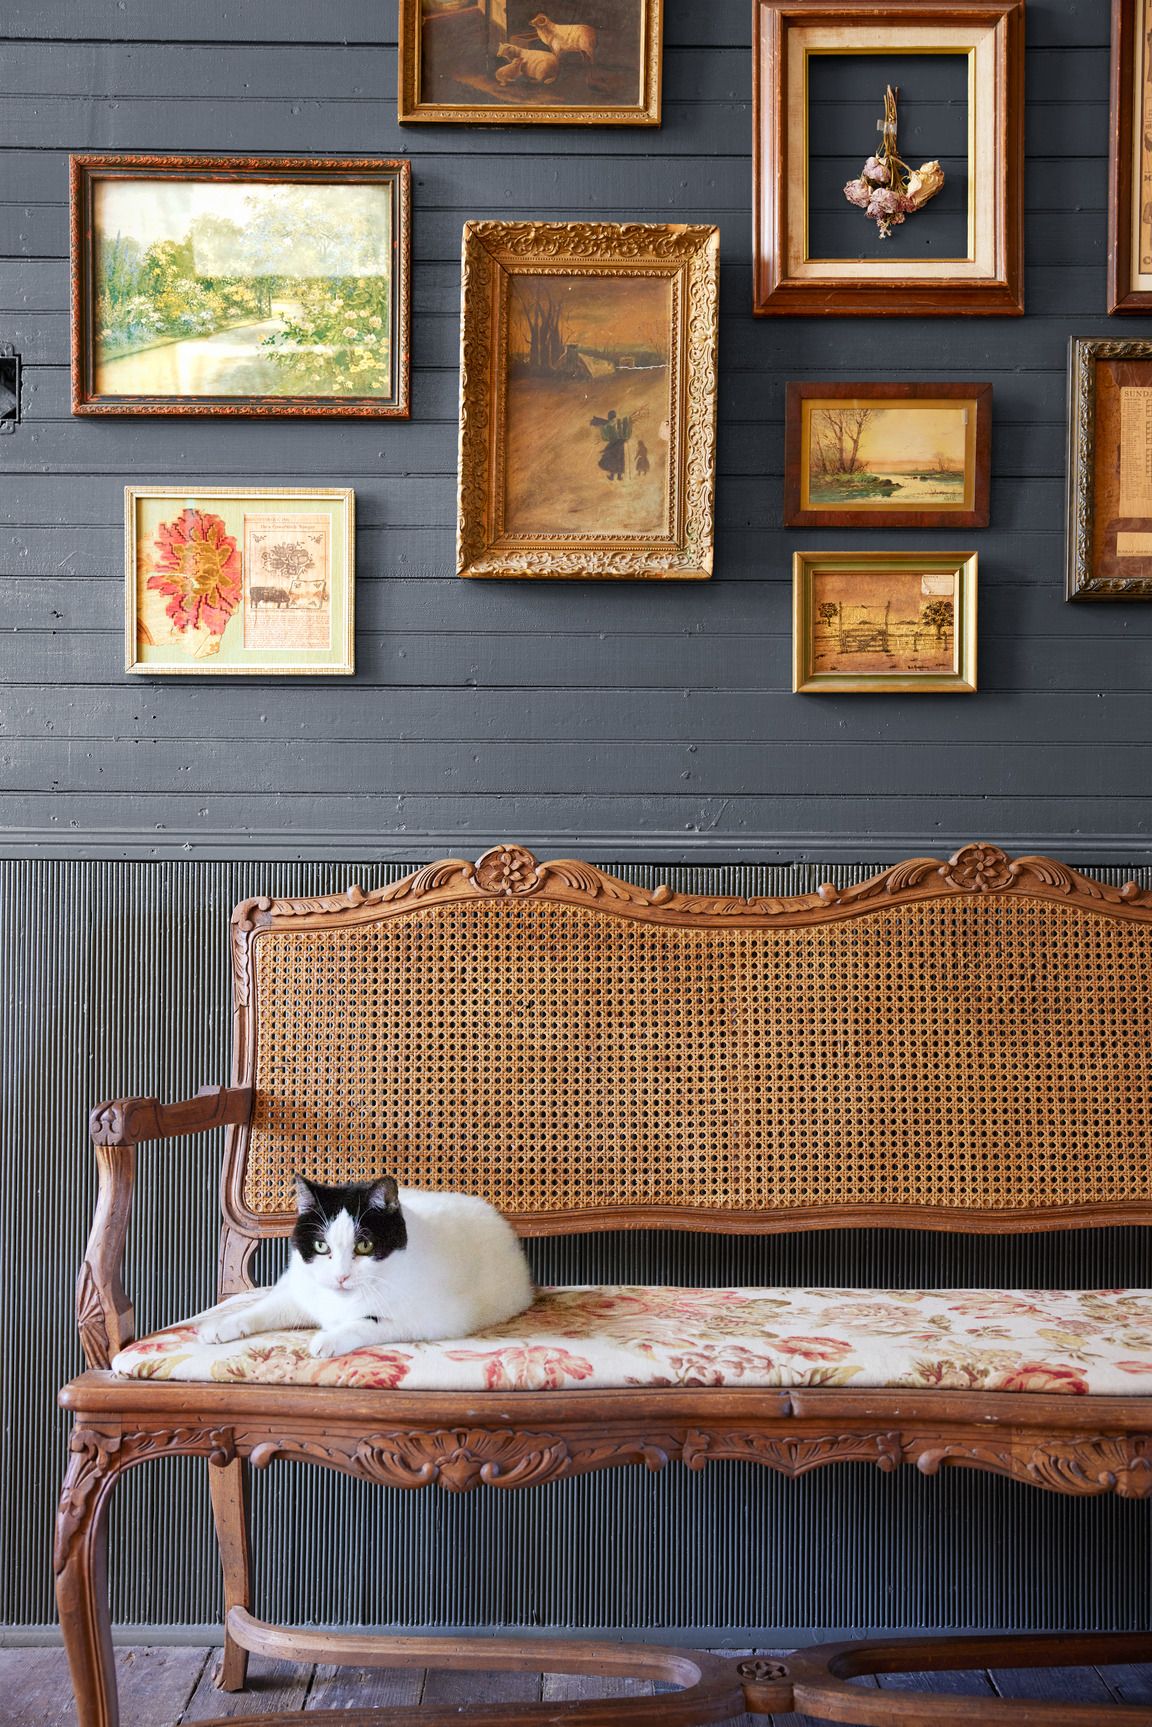 Gallery Wall Ideas: Where to Buy Frames and Art